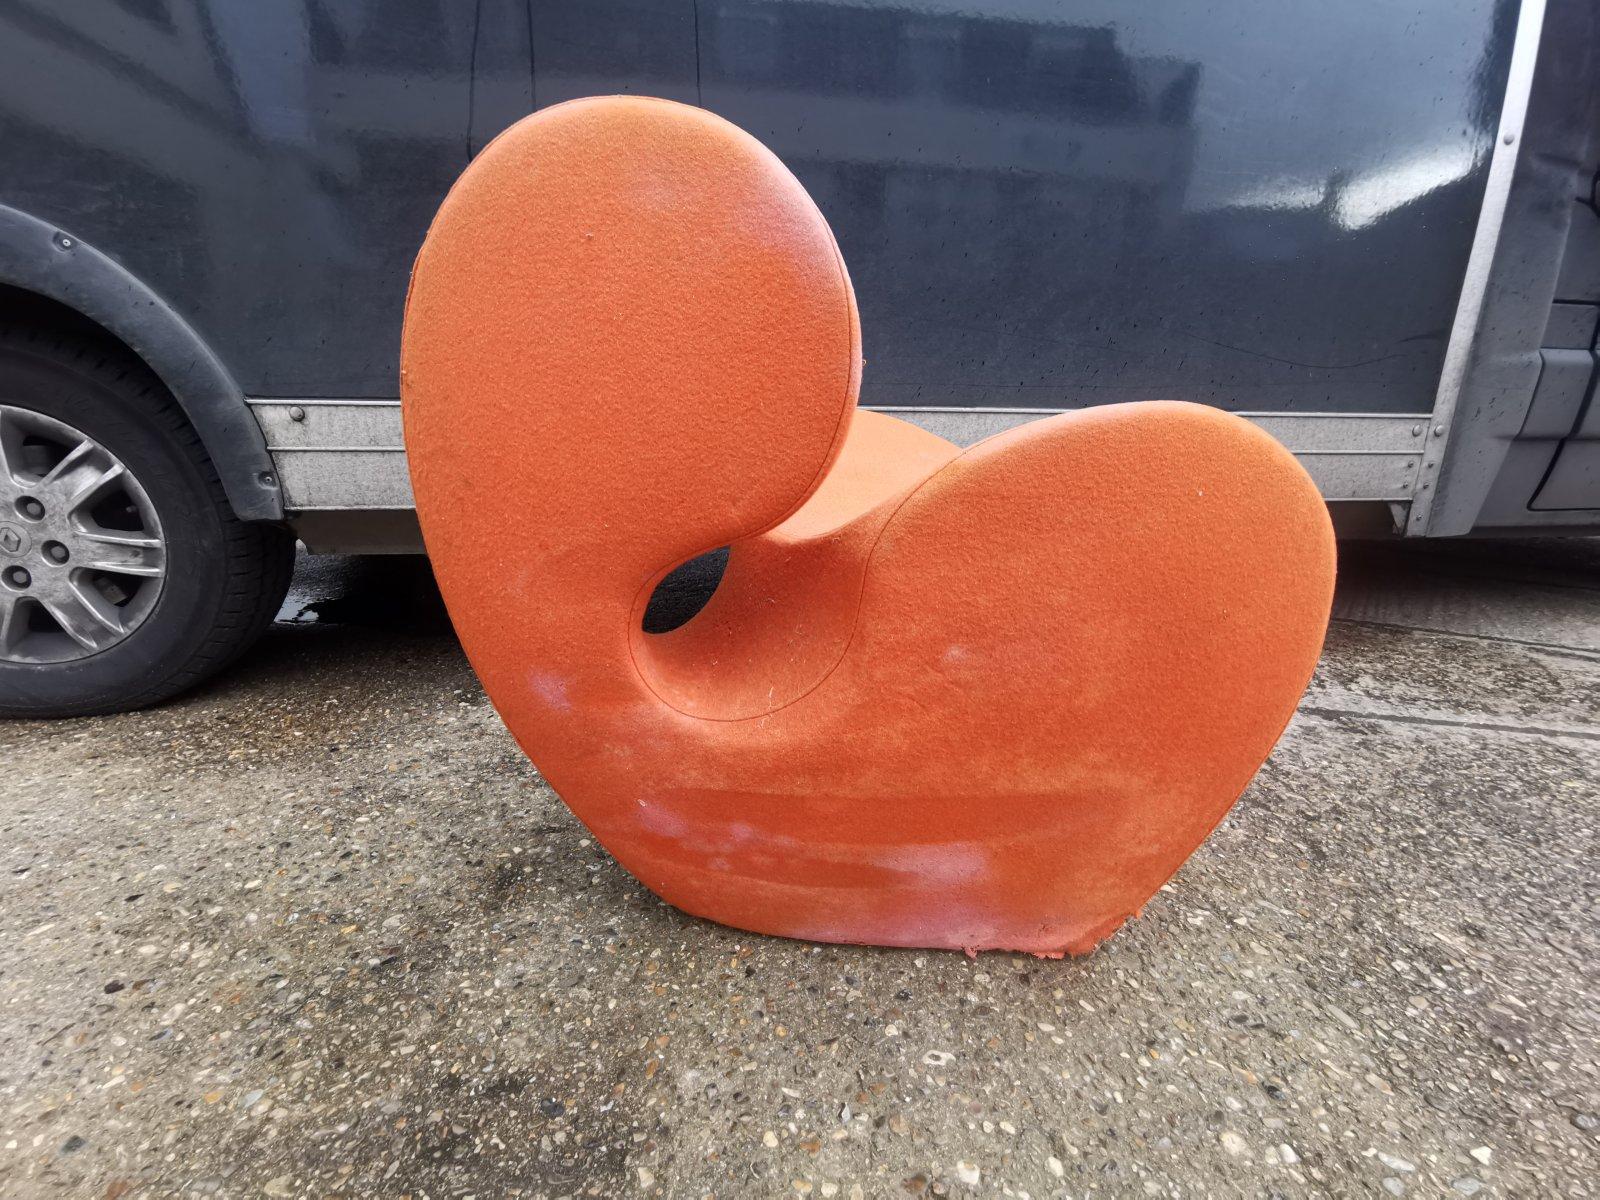 Ron Arad Circa 1991.
Four soft big heavy orange armchairs made by Moroso. Italy.
Soft big heavy is an armchair with stress-resistant polyurethane foam and polyester fiberfill, on a hardwood frame.? 
These four funky orange armchairs were part of